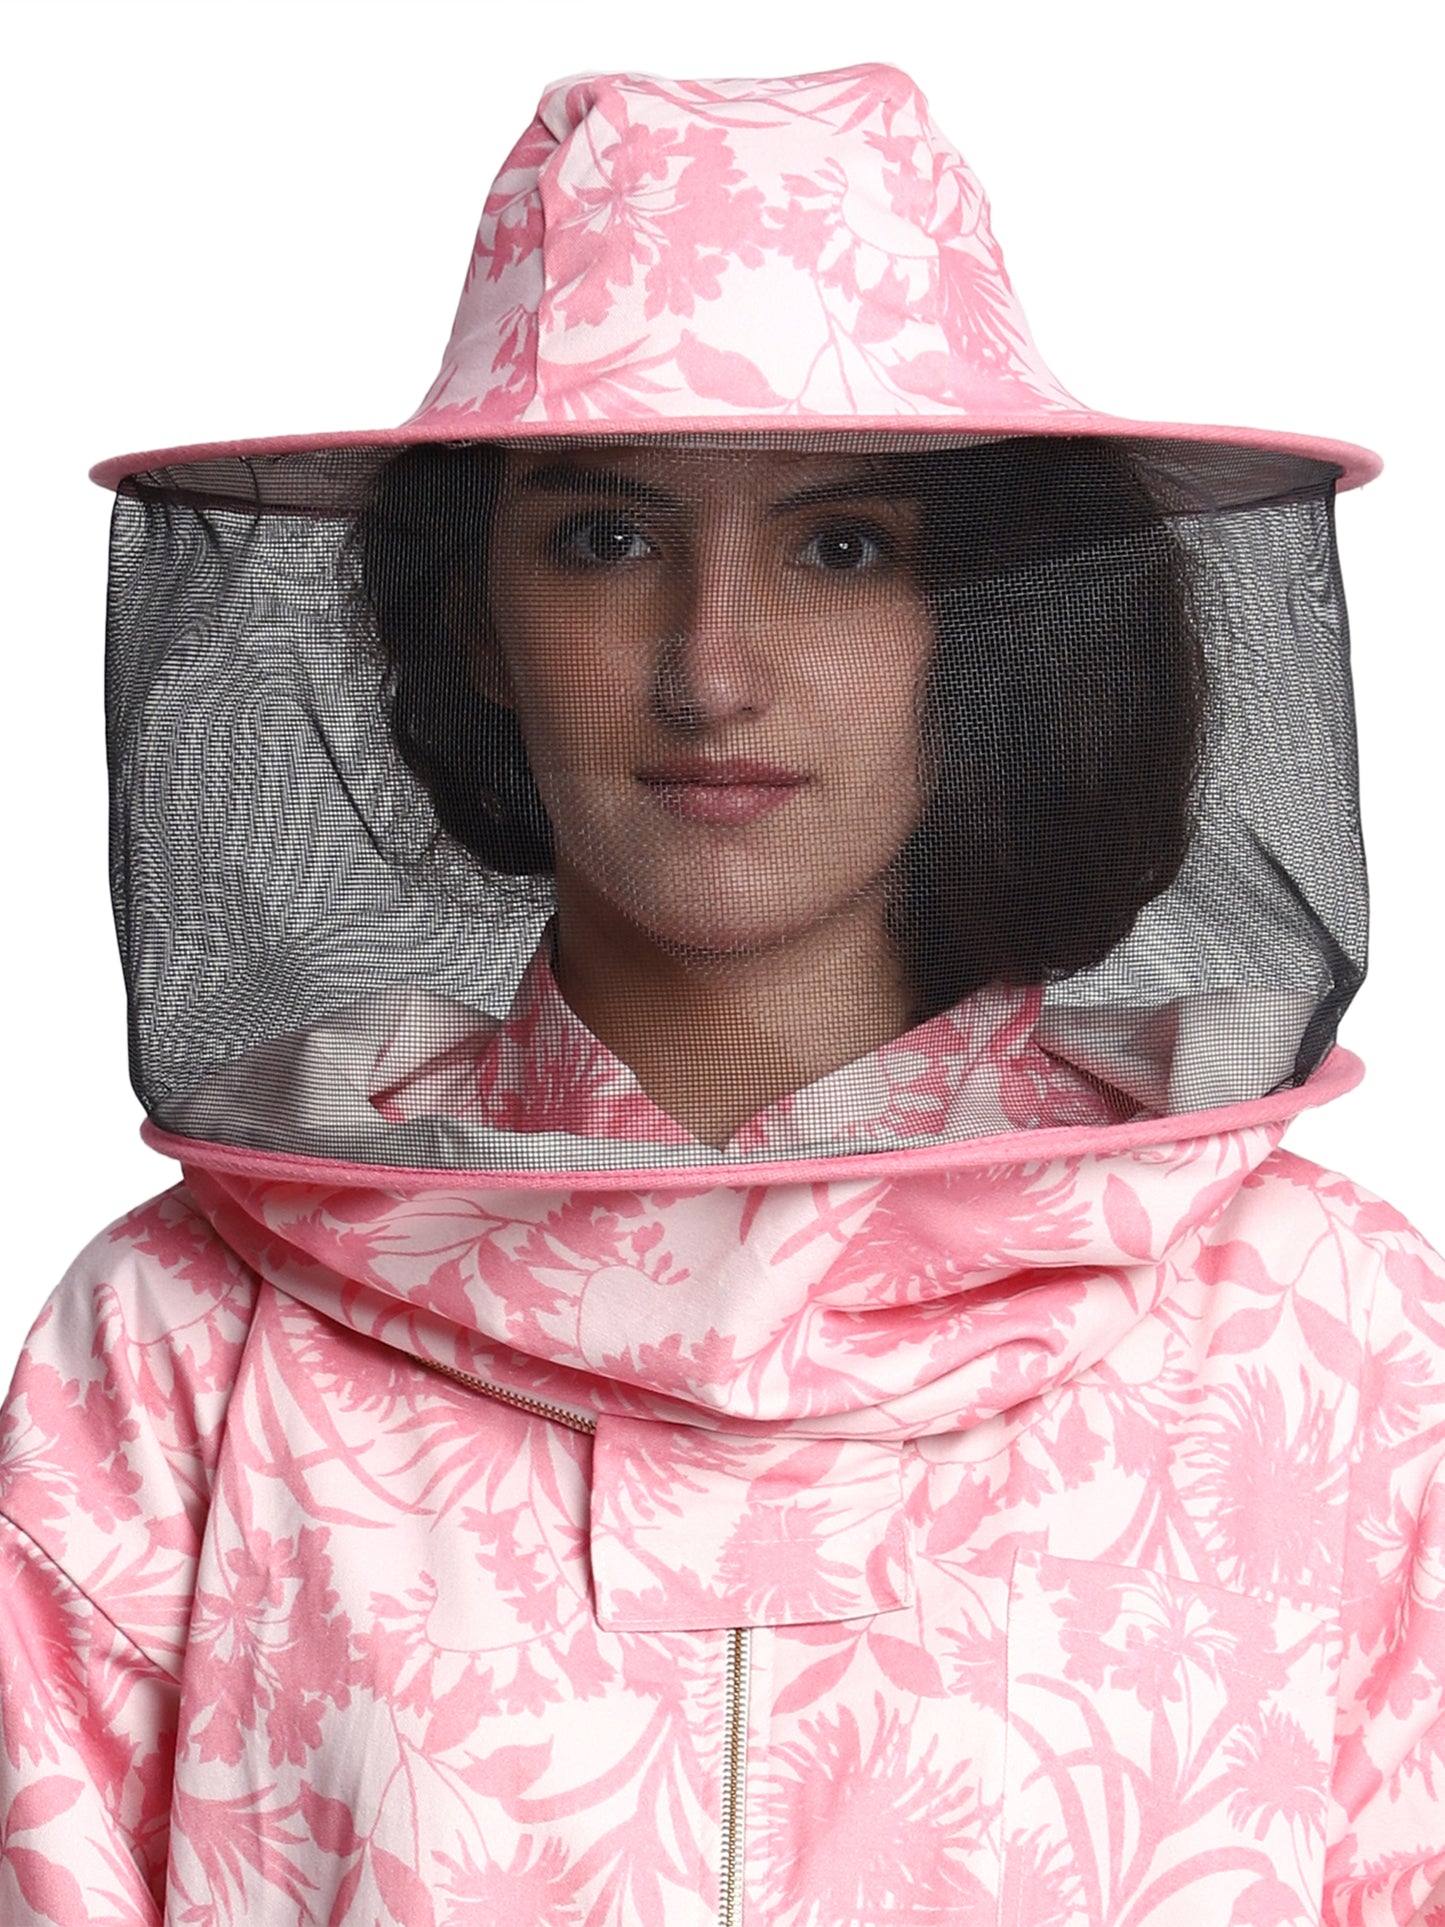 Beeattire Cotton Pink Bee Suit for Women with Round Hood - Pink Flower Printed